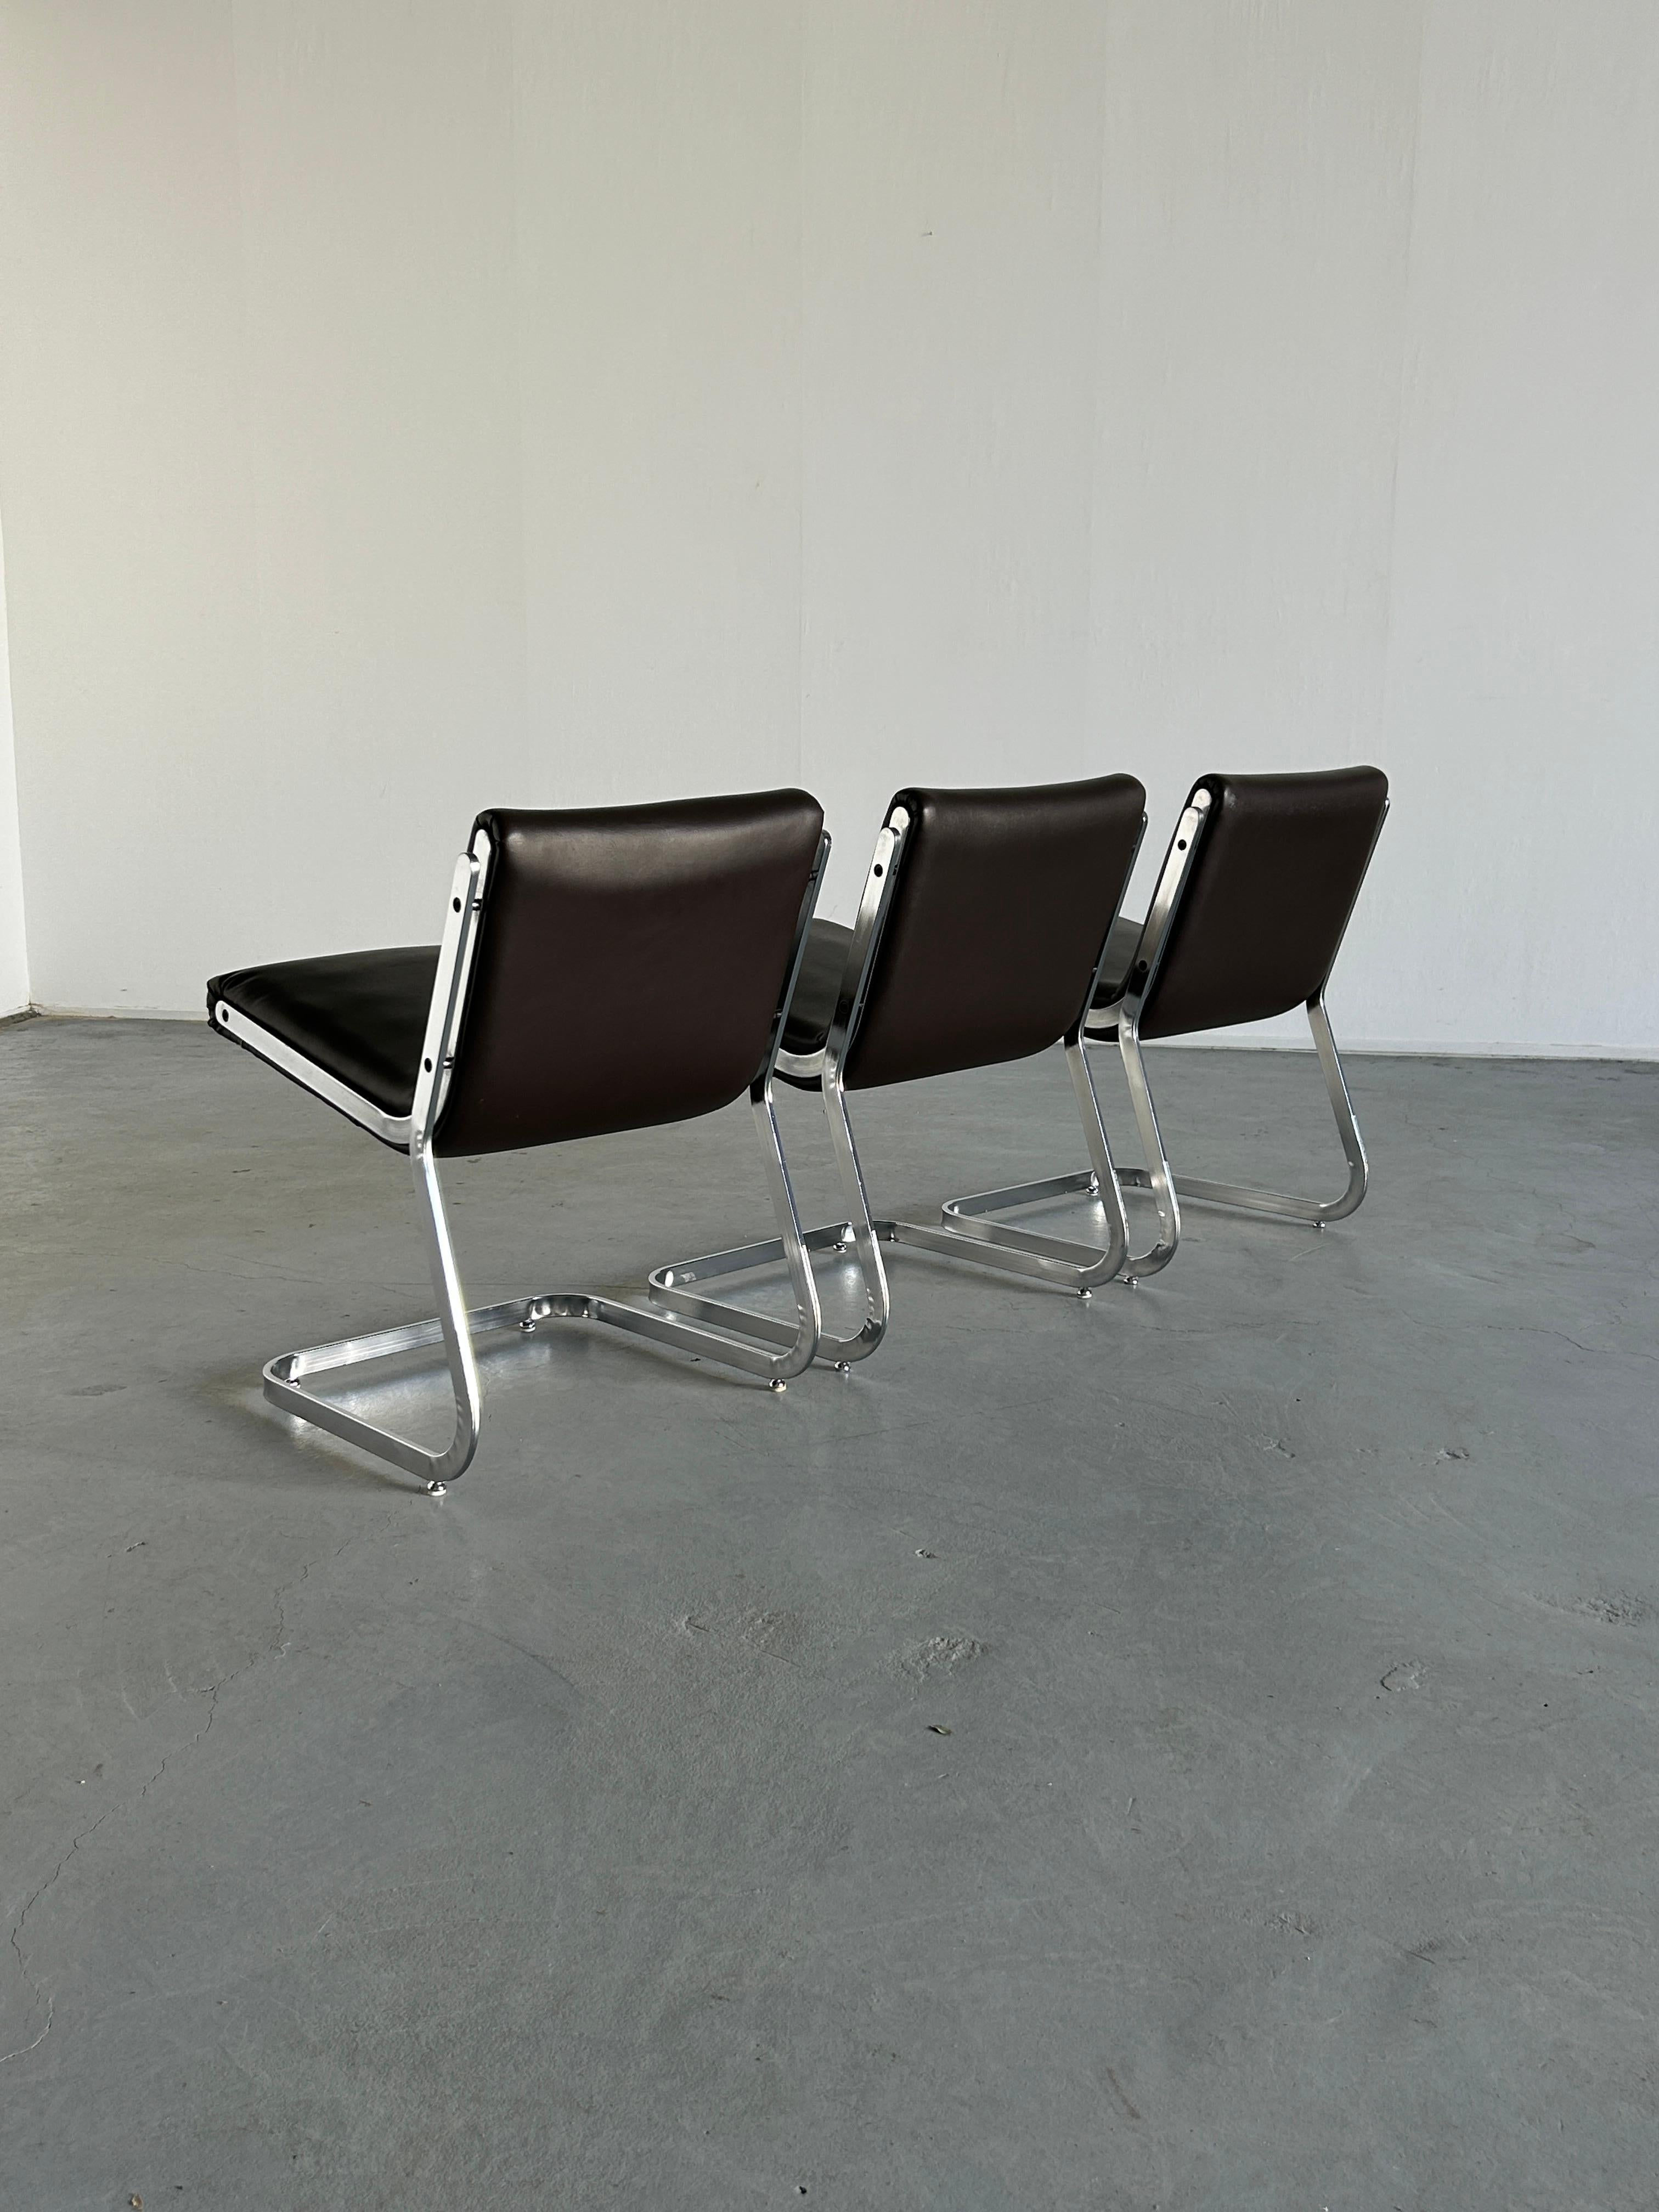 1 of 3 Italian Space Age Cantilever Lounge Chairs in Steel and Faux Leather, 70s For Sale 1